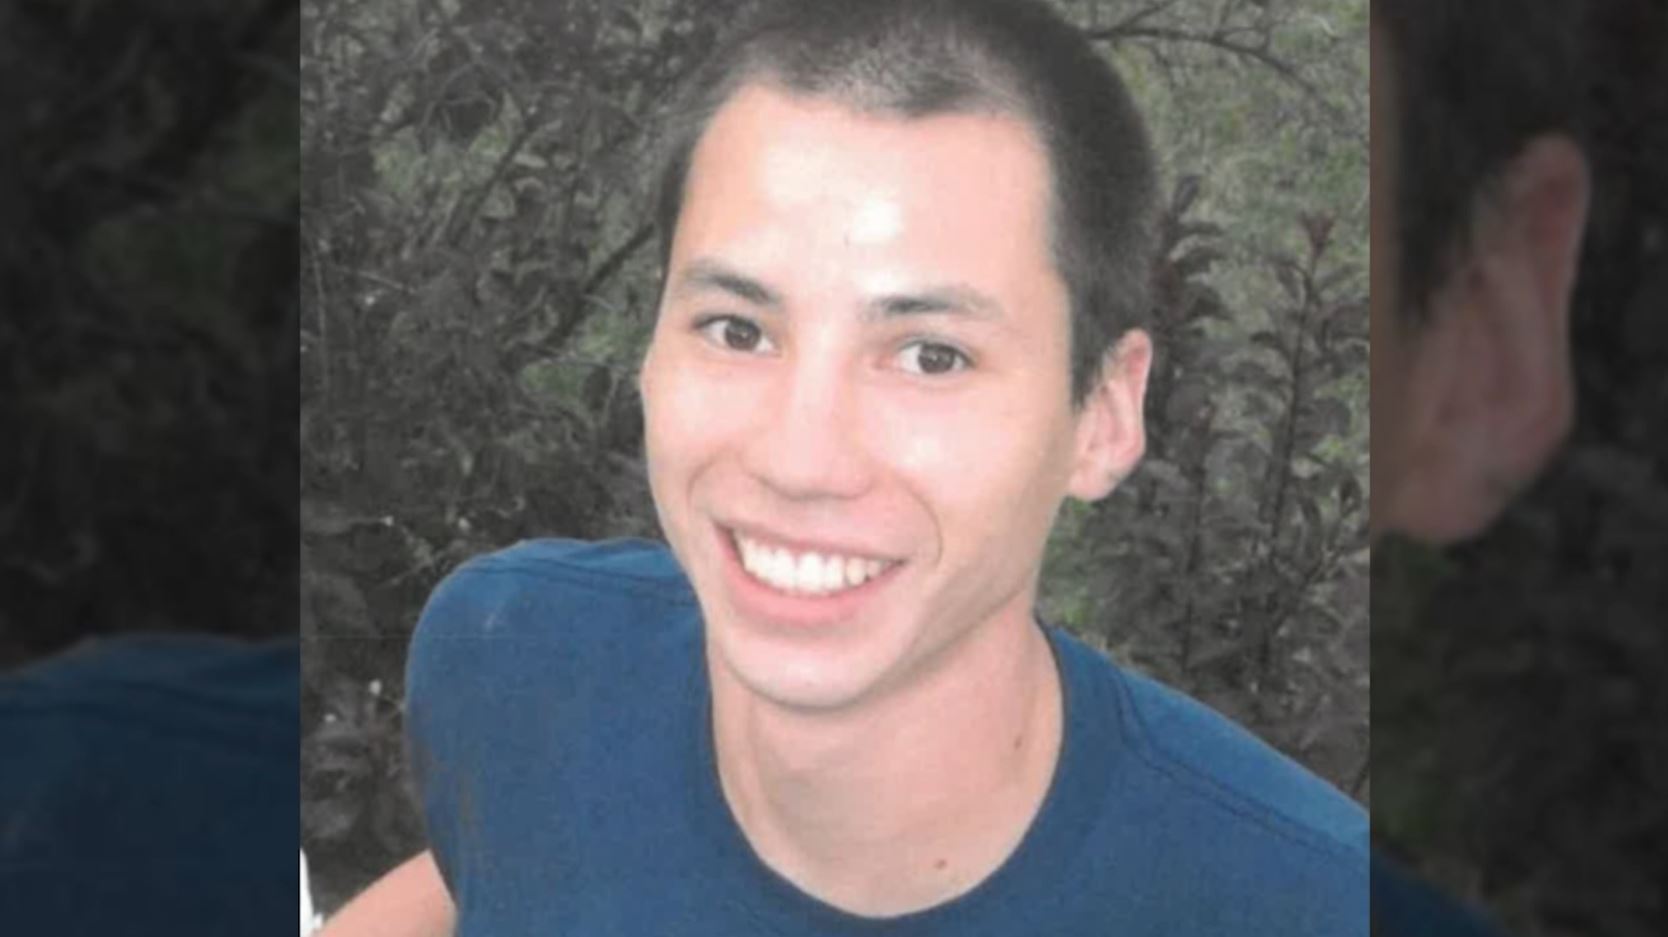 Officials looking into the disappearance of Jacob Cabinaw more than a decade later